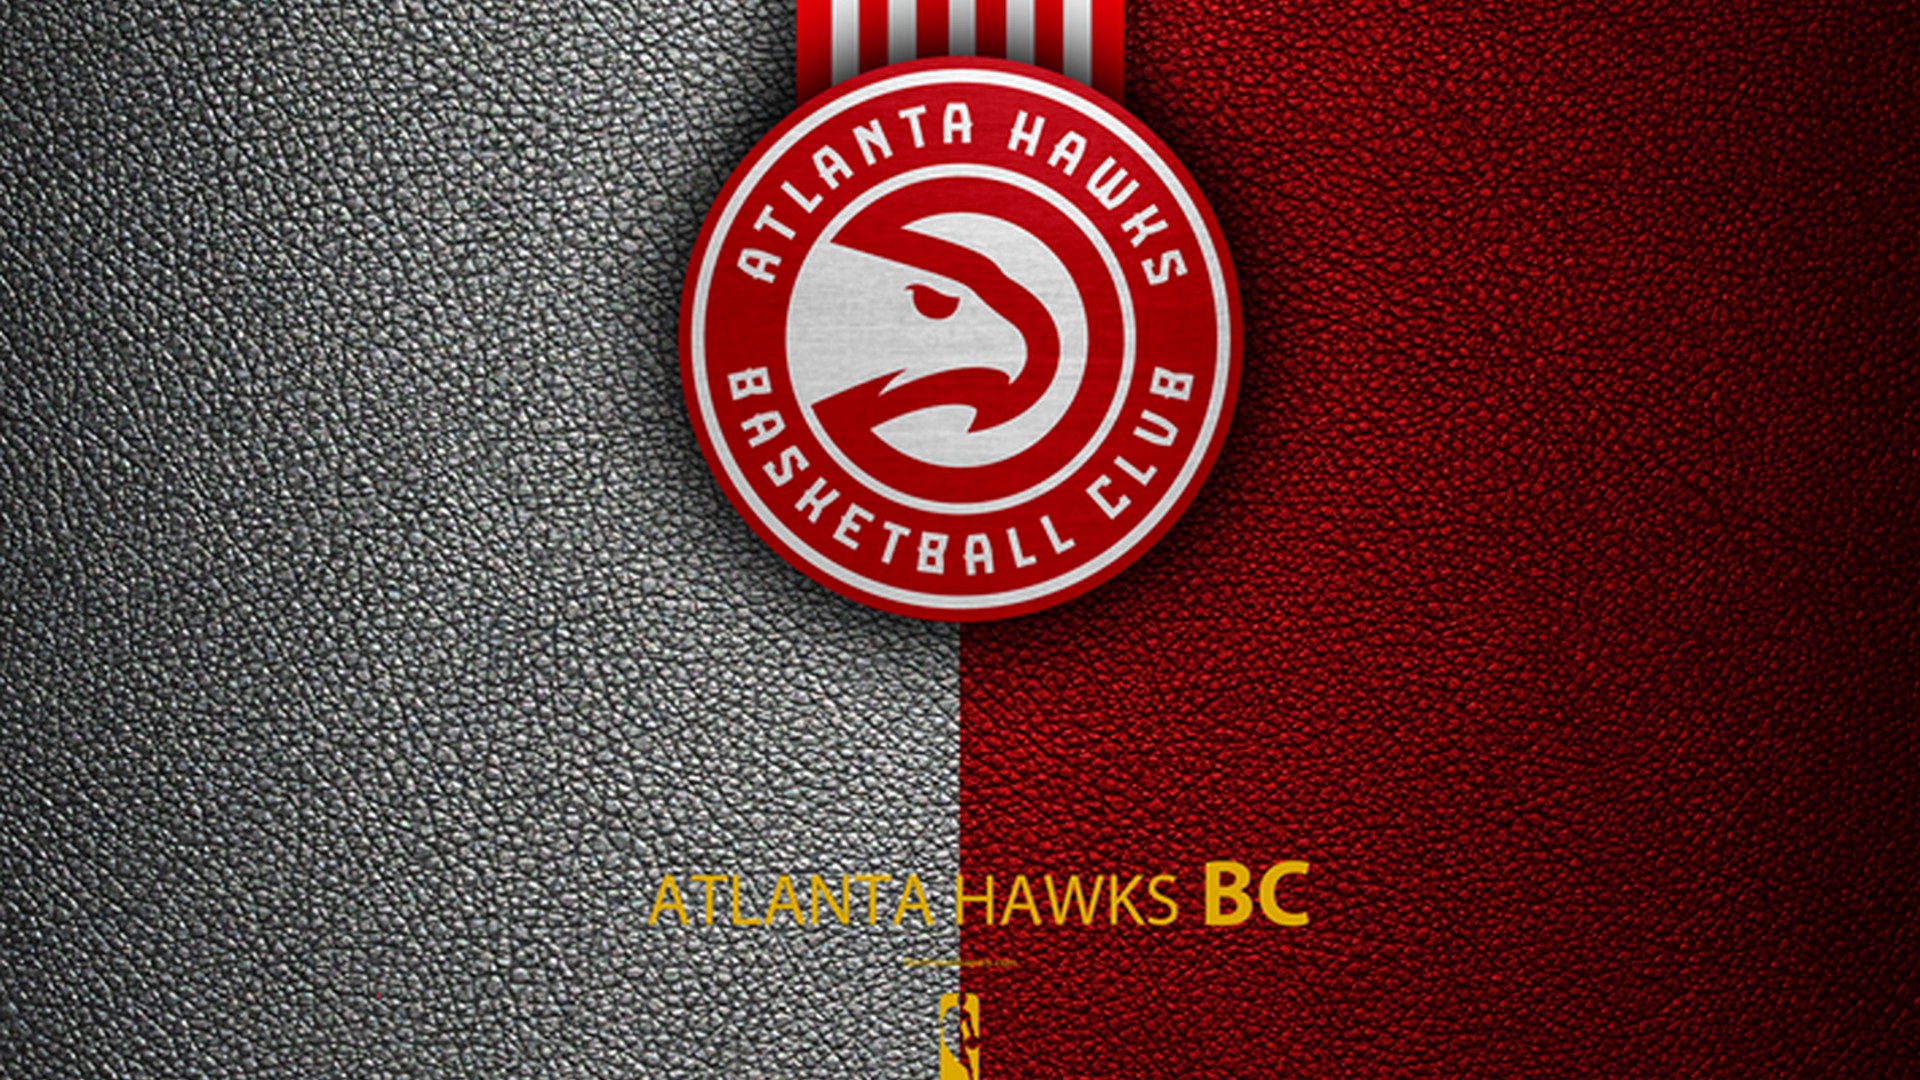 Atlanta Hawks Backgrounds HD with image dimensions 1920x1080 pixel. You can make this wallpaper for your Desktop Computer Backgrounds, Windows or Mac Screensavers, iPhone Lock screen, Tablet or Android and another Mobile Phone device